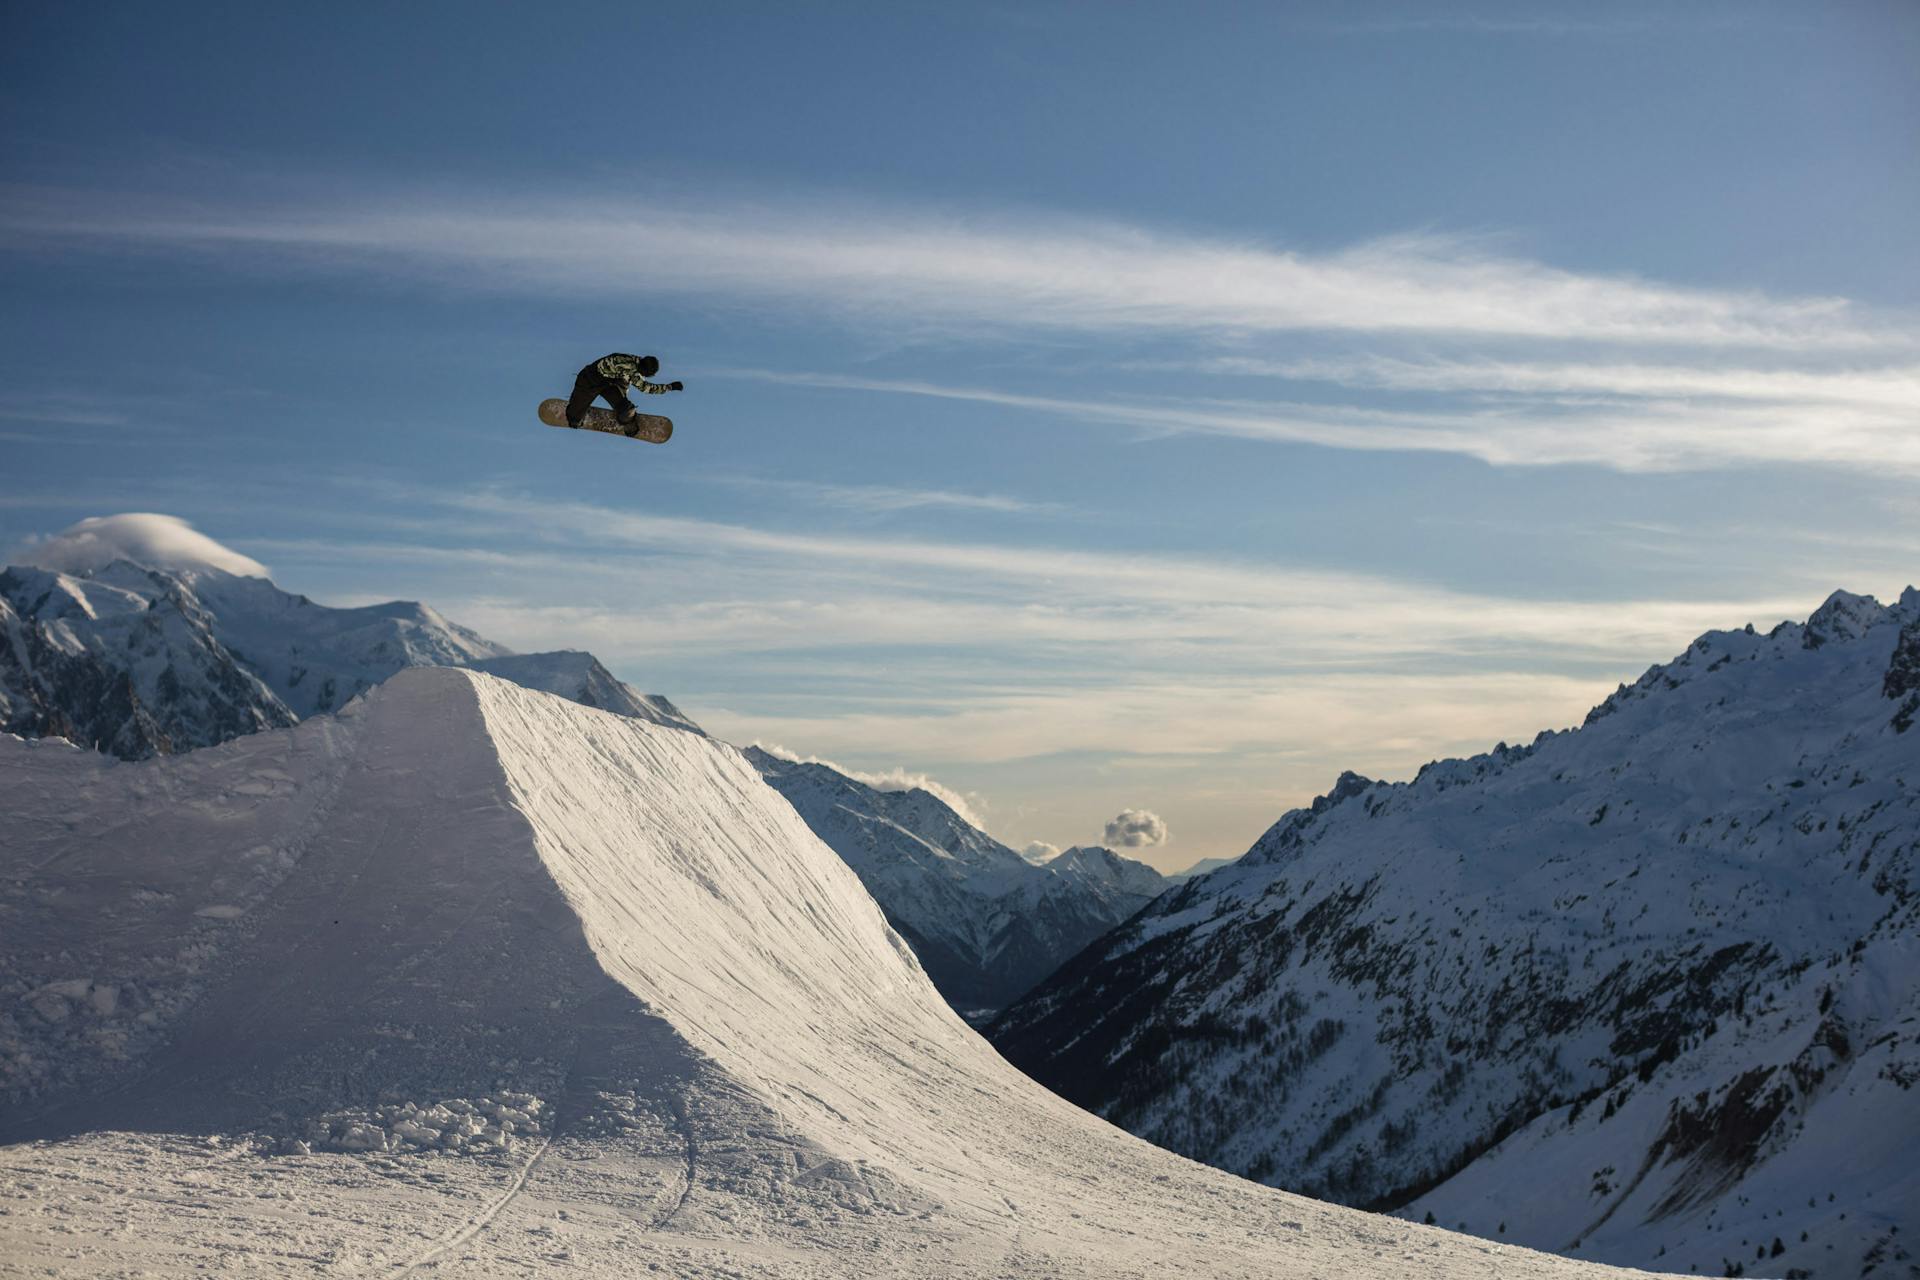 Snowboarder in the sky 